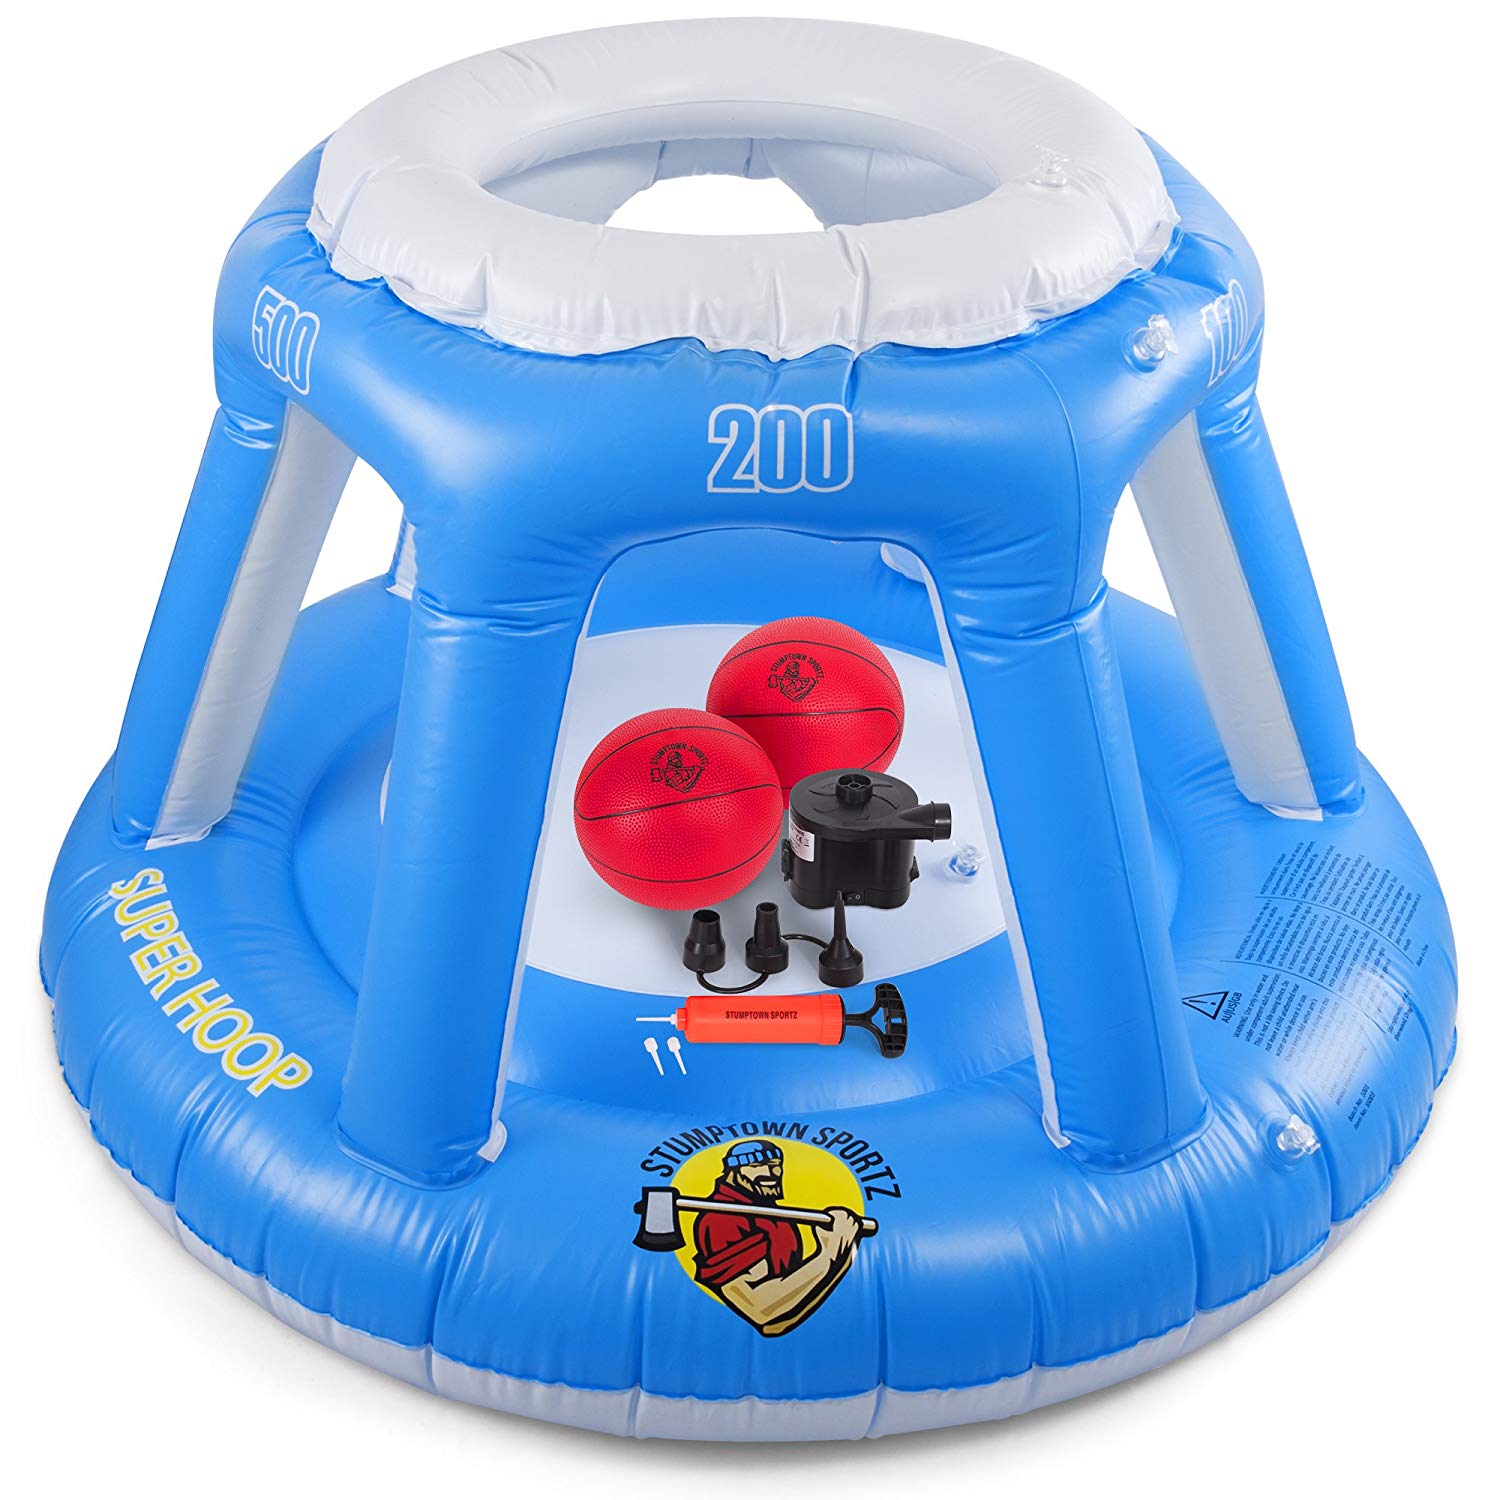 Best Pool Toys Reviewed & Rated for Fun TheGearHunt